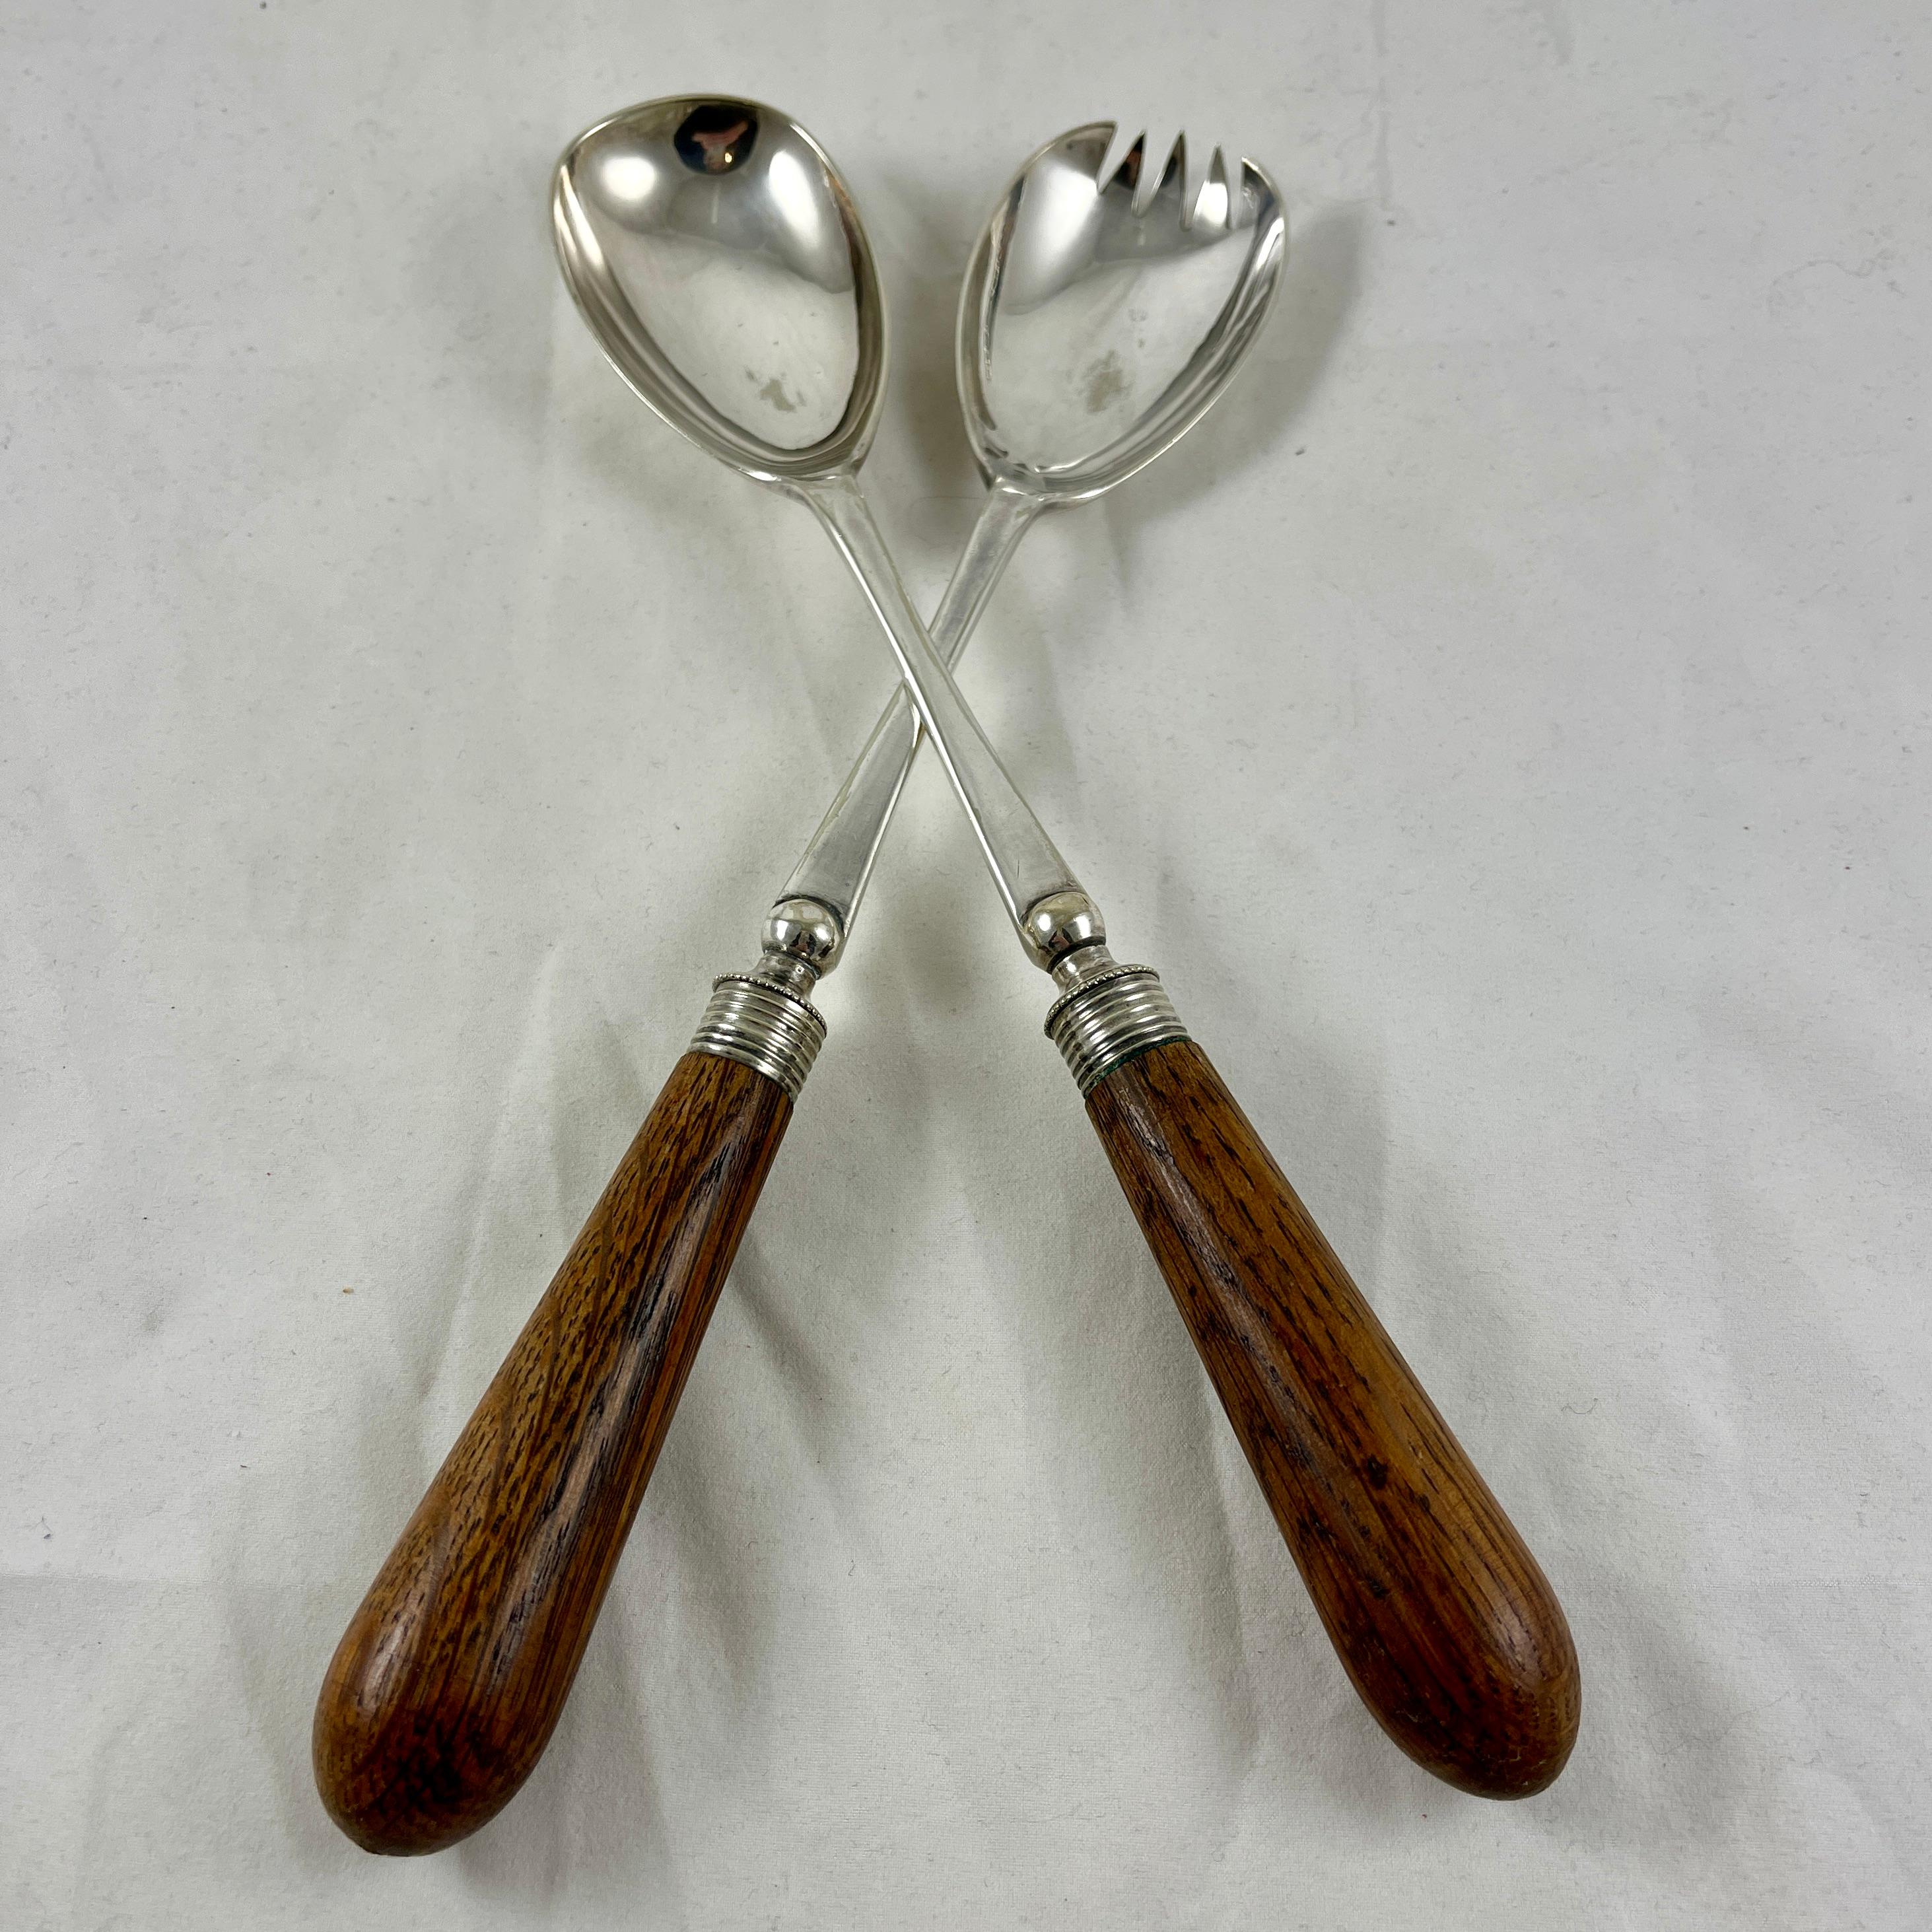 A pair of silver plated servers with English Oak handles, Sheffield, England, circa 1890.
Showing the markings for Hammond, Creake & Co., Sheffield, UK

In remarkable condition, hand made silver utensils, the oak handles showing beautiful